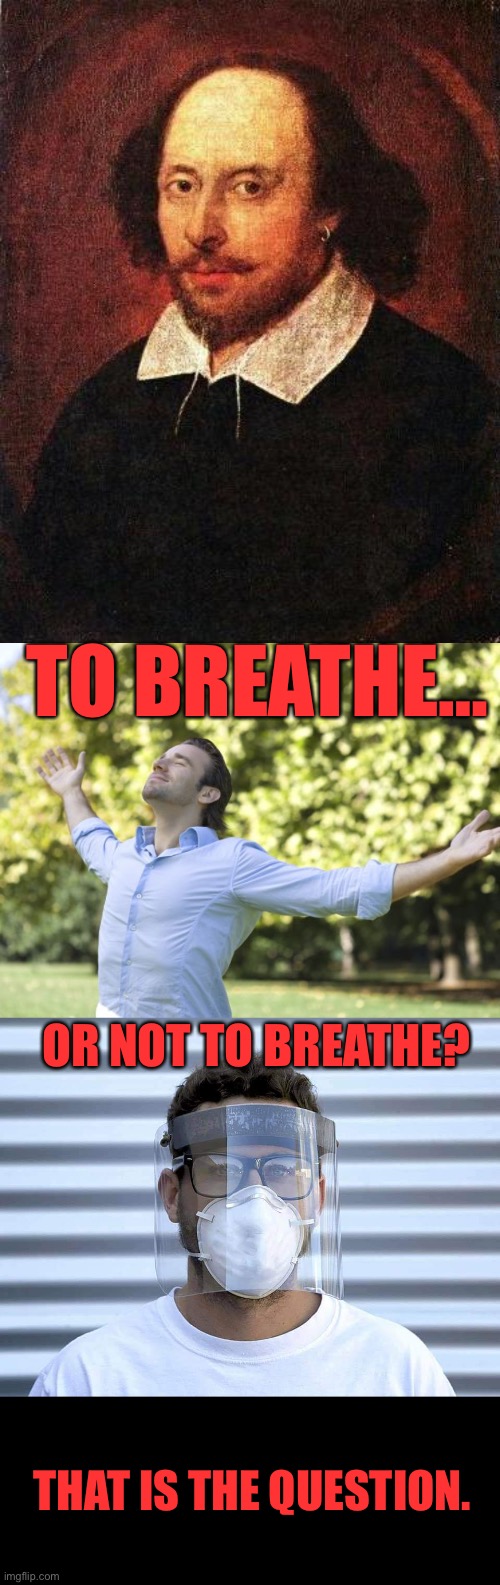 I choose to breathe freely… sweet, clean, fresh air… |  TO BREATHE…; OR NOT TO BREATHE? THAT IS THE QUESTION. | image tagged in shakespeare | made w/ Imgflip meme maker